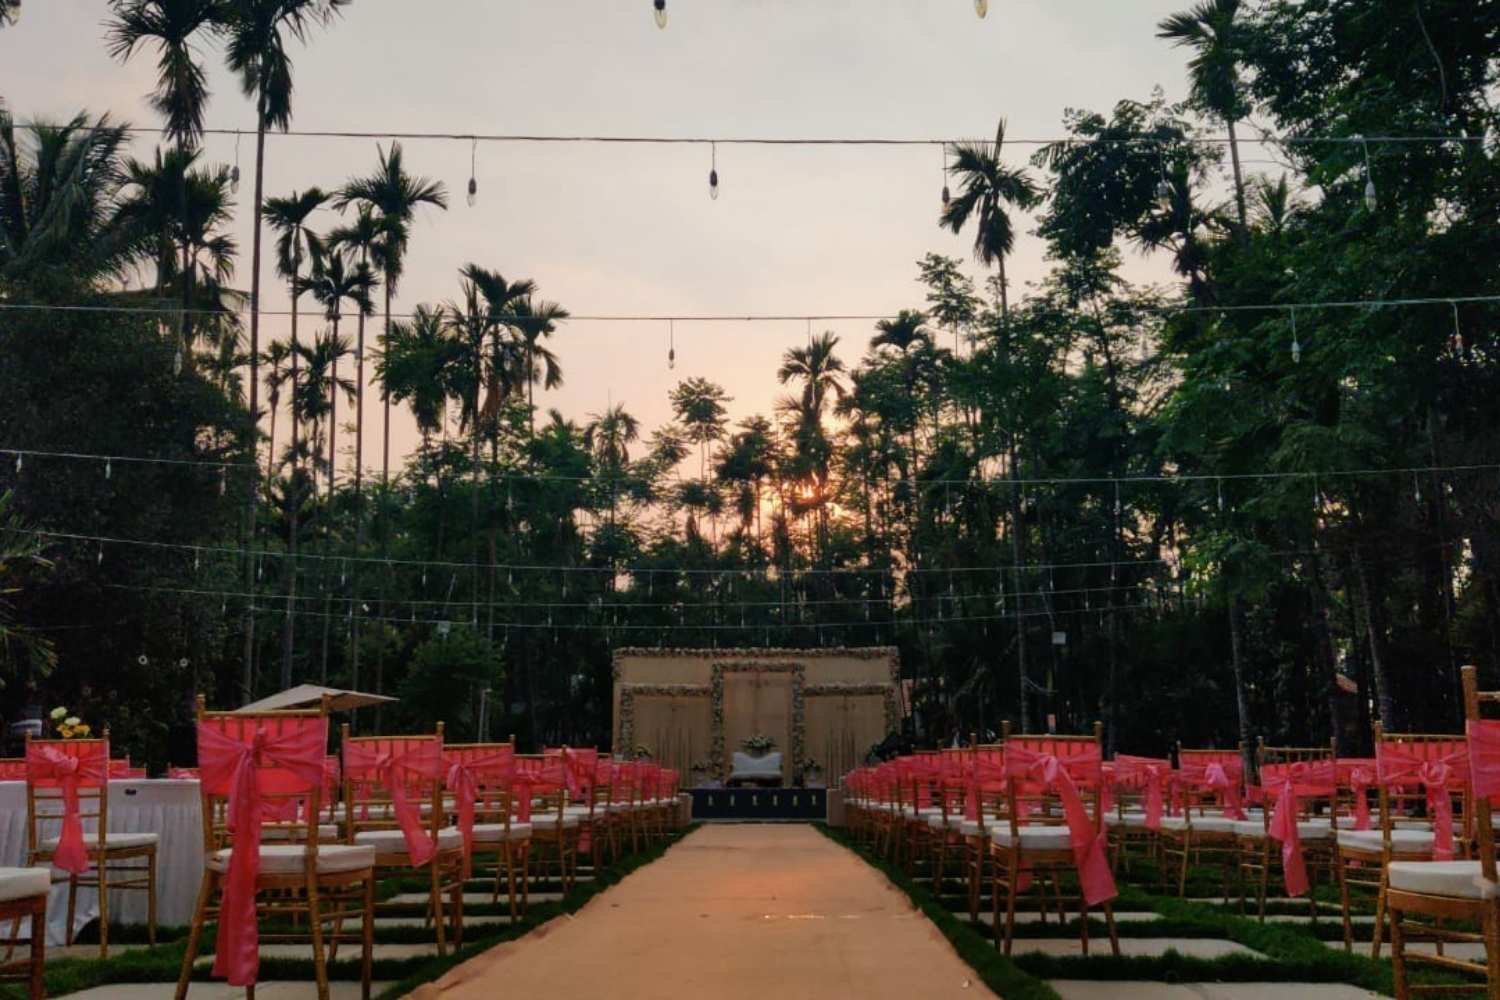 Seating arrangements at an outdoor wedding venue in Bangalore